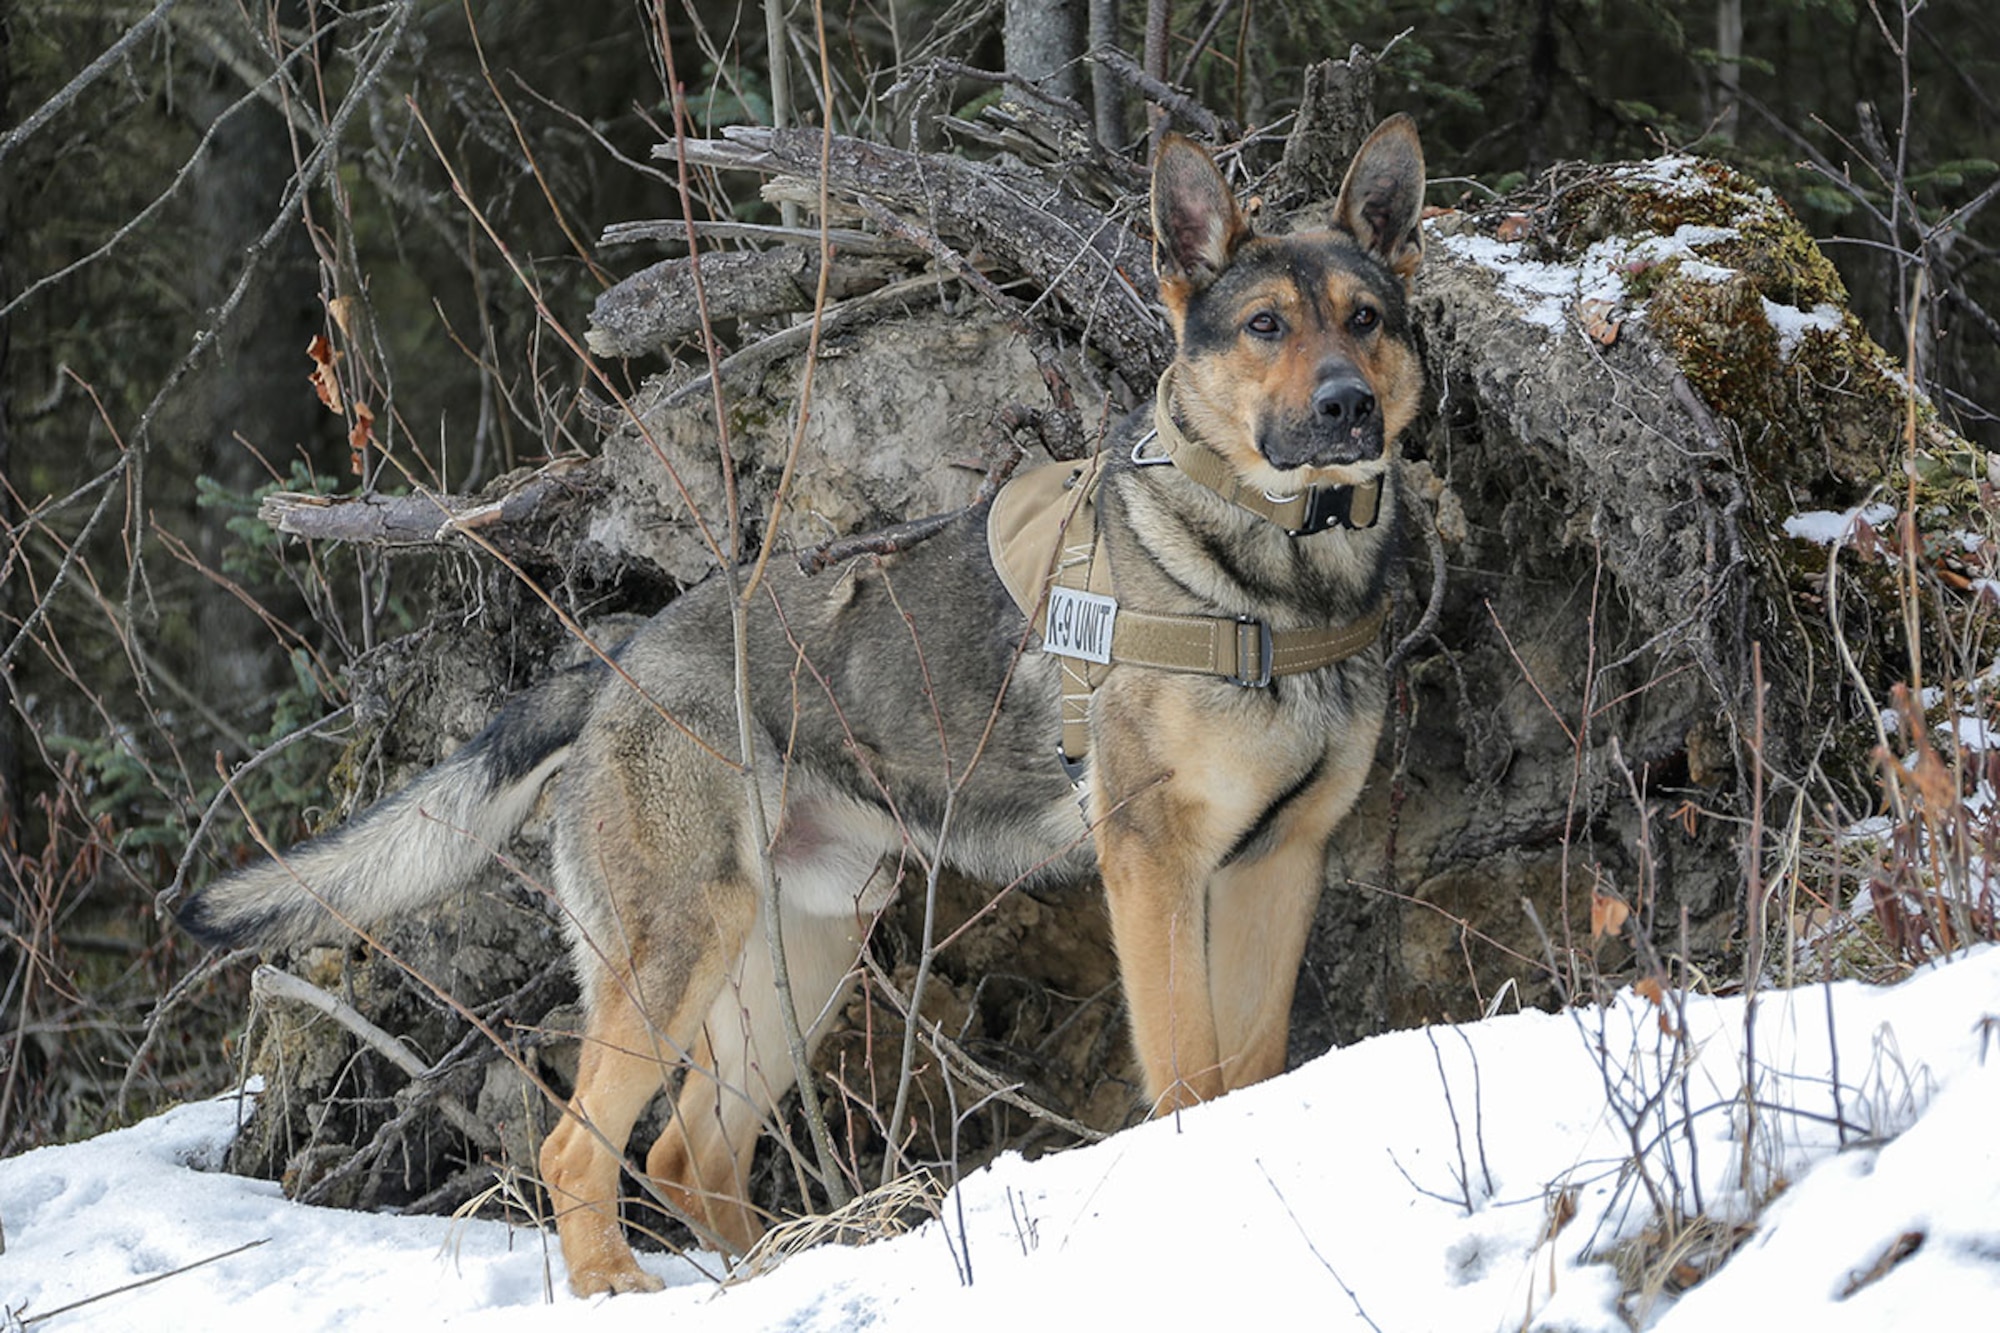 U.S. Army military working dog, Faro, assigned to the 549th Military Working Dog Detachment, searches for simulated hidden explosives while conducting K-9 training at Joint Base Elmendorf-Richardson, Alaska, March 17, 2016. Military working dogs are trained to respond to various law enforcement emergencies as well as detect hidden narcotics and explosives. (U.S. Air Force photo/Alejandro Peña)